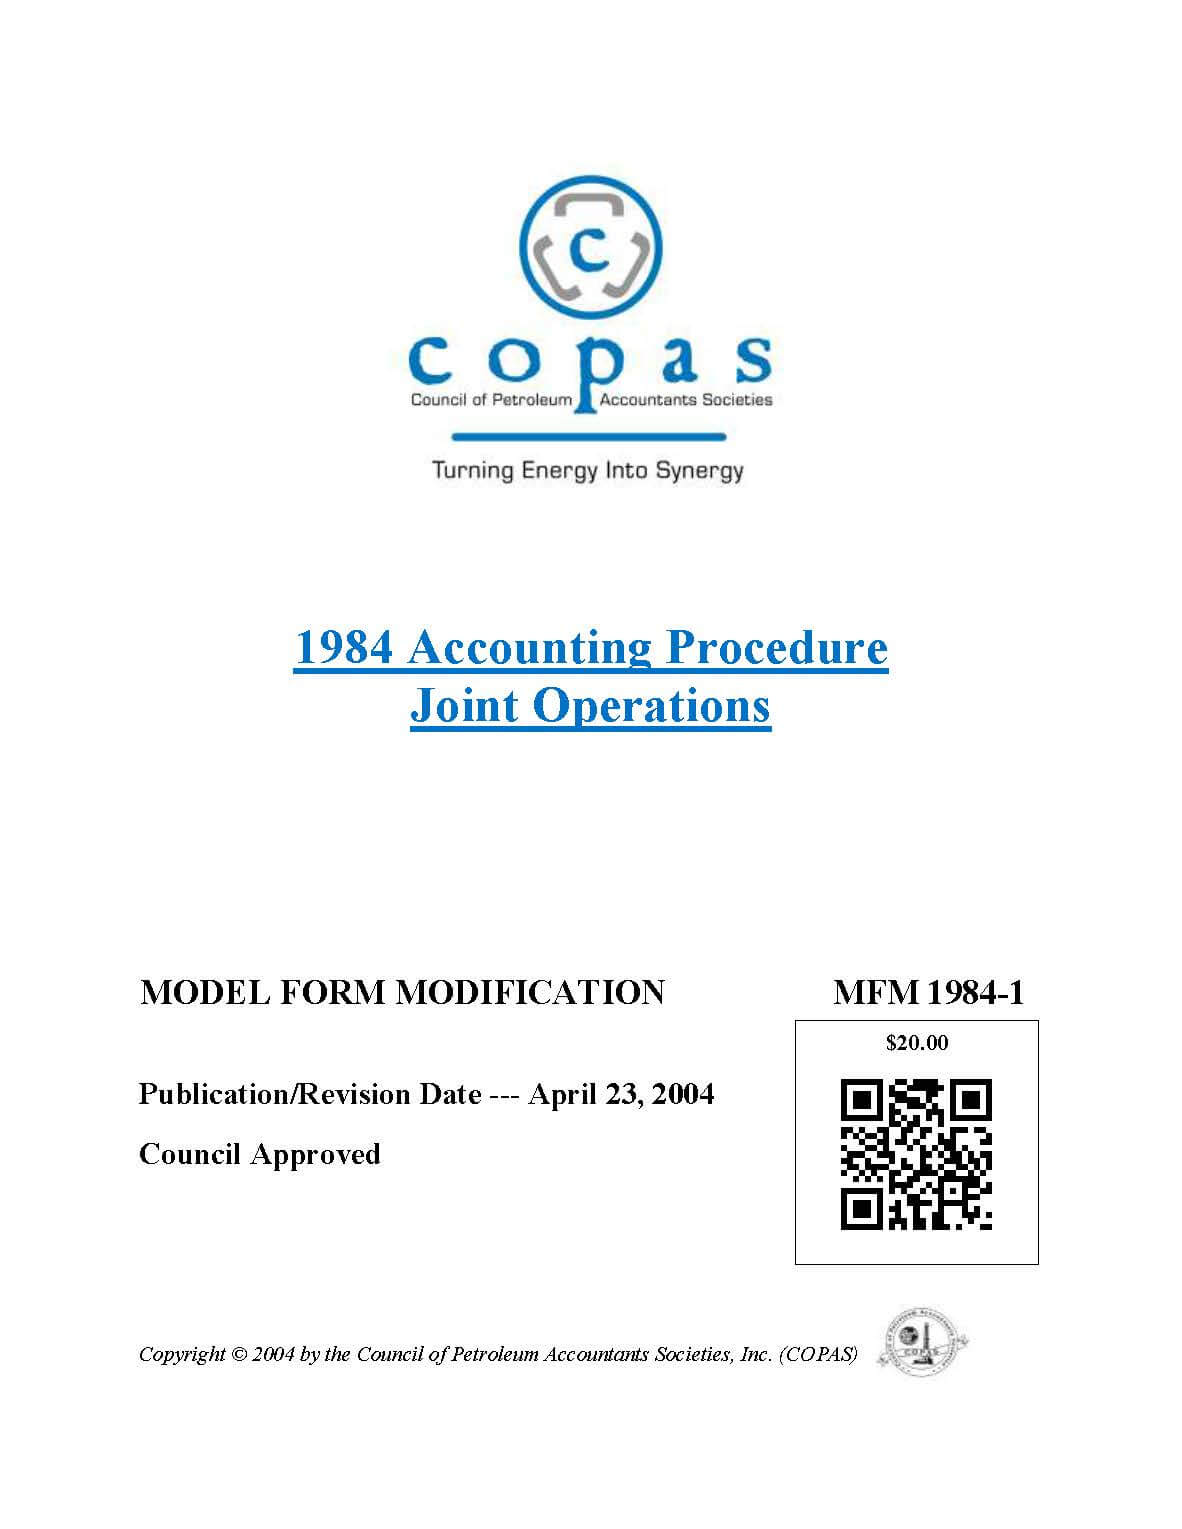 MFM-1984-1 1984 Accounting Procedure Joint Operations Model Form Modification